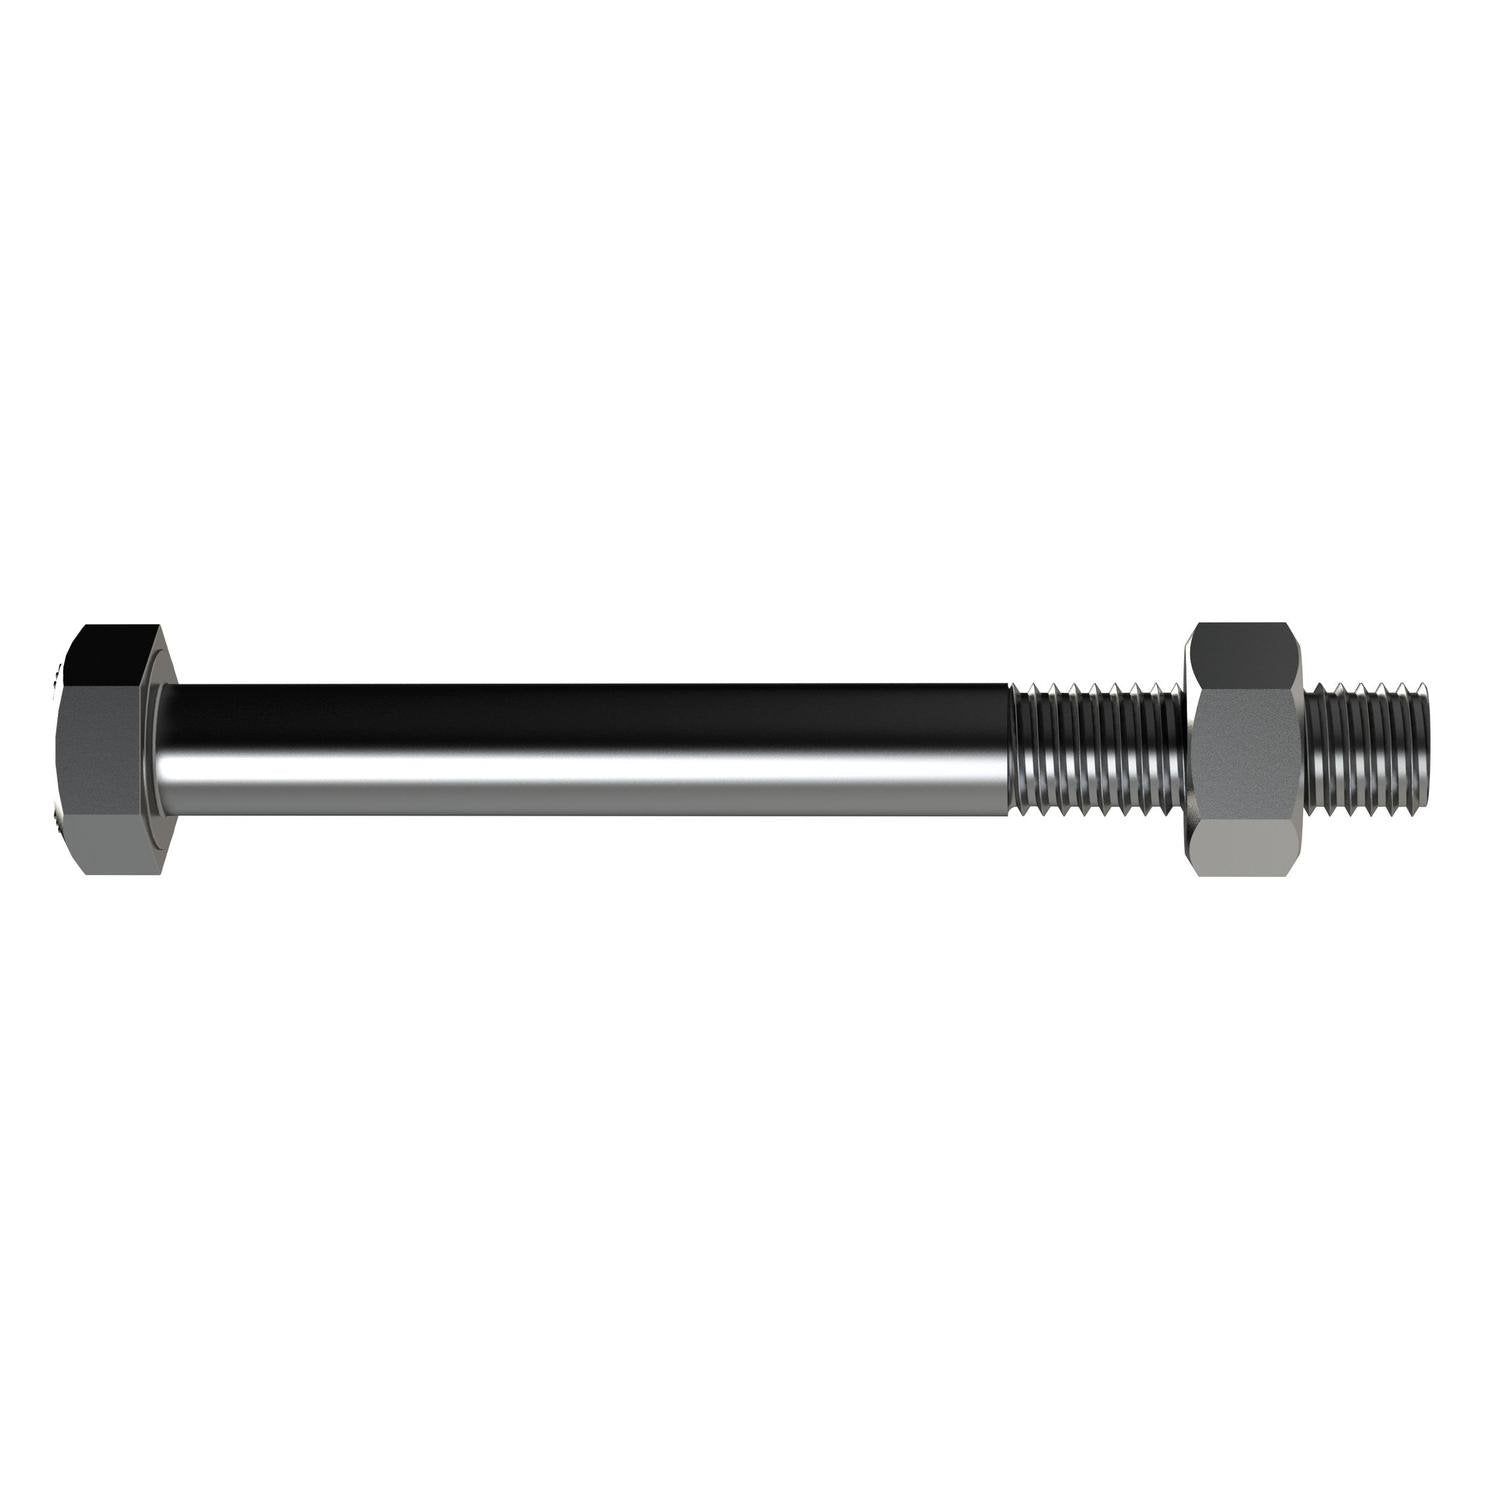 Bremick Engineer Bolt & Nut M16 X 180Mm Stainless Steel